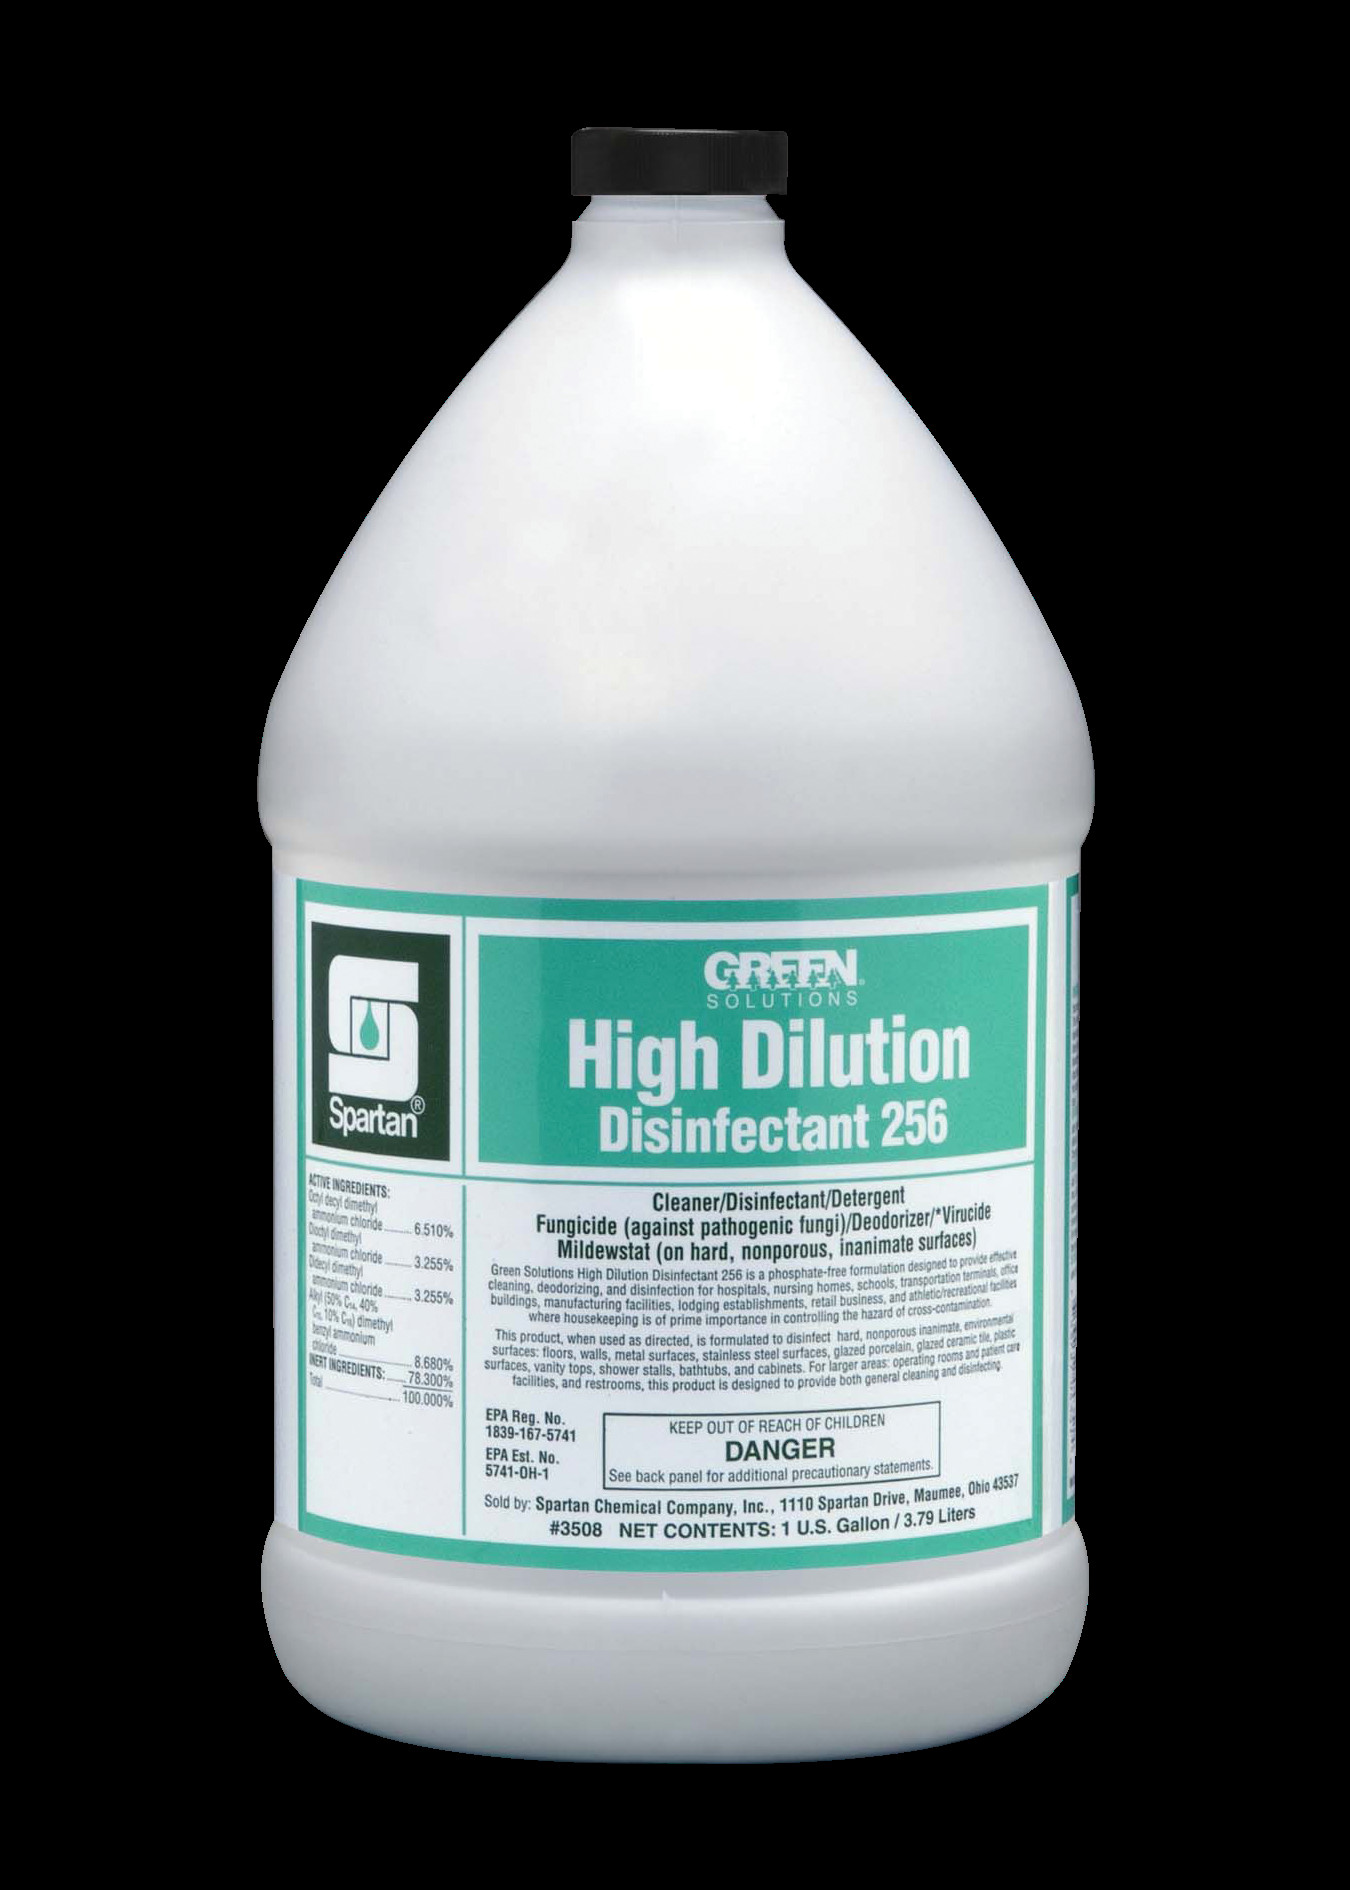 Spartan Chemical Company GS High Dilution Disinfectant 256, 1 GAL 4/CSE